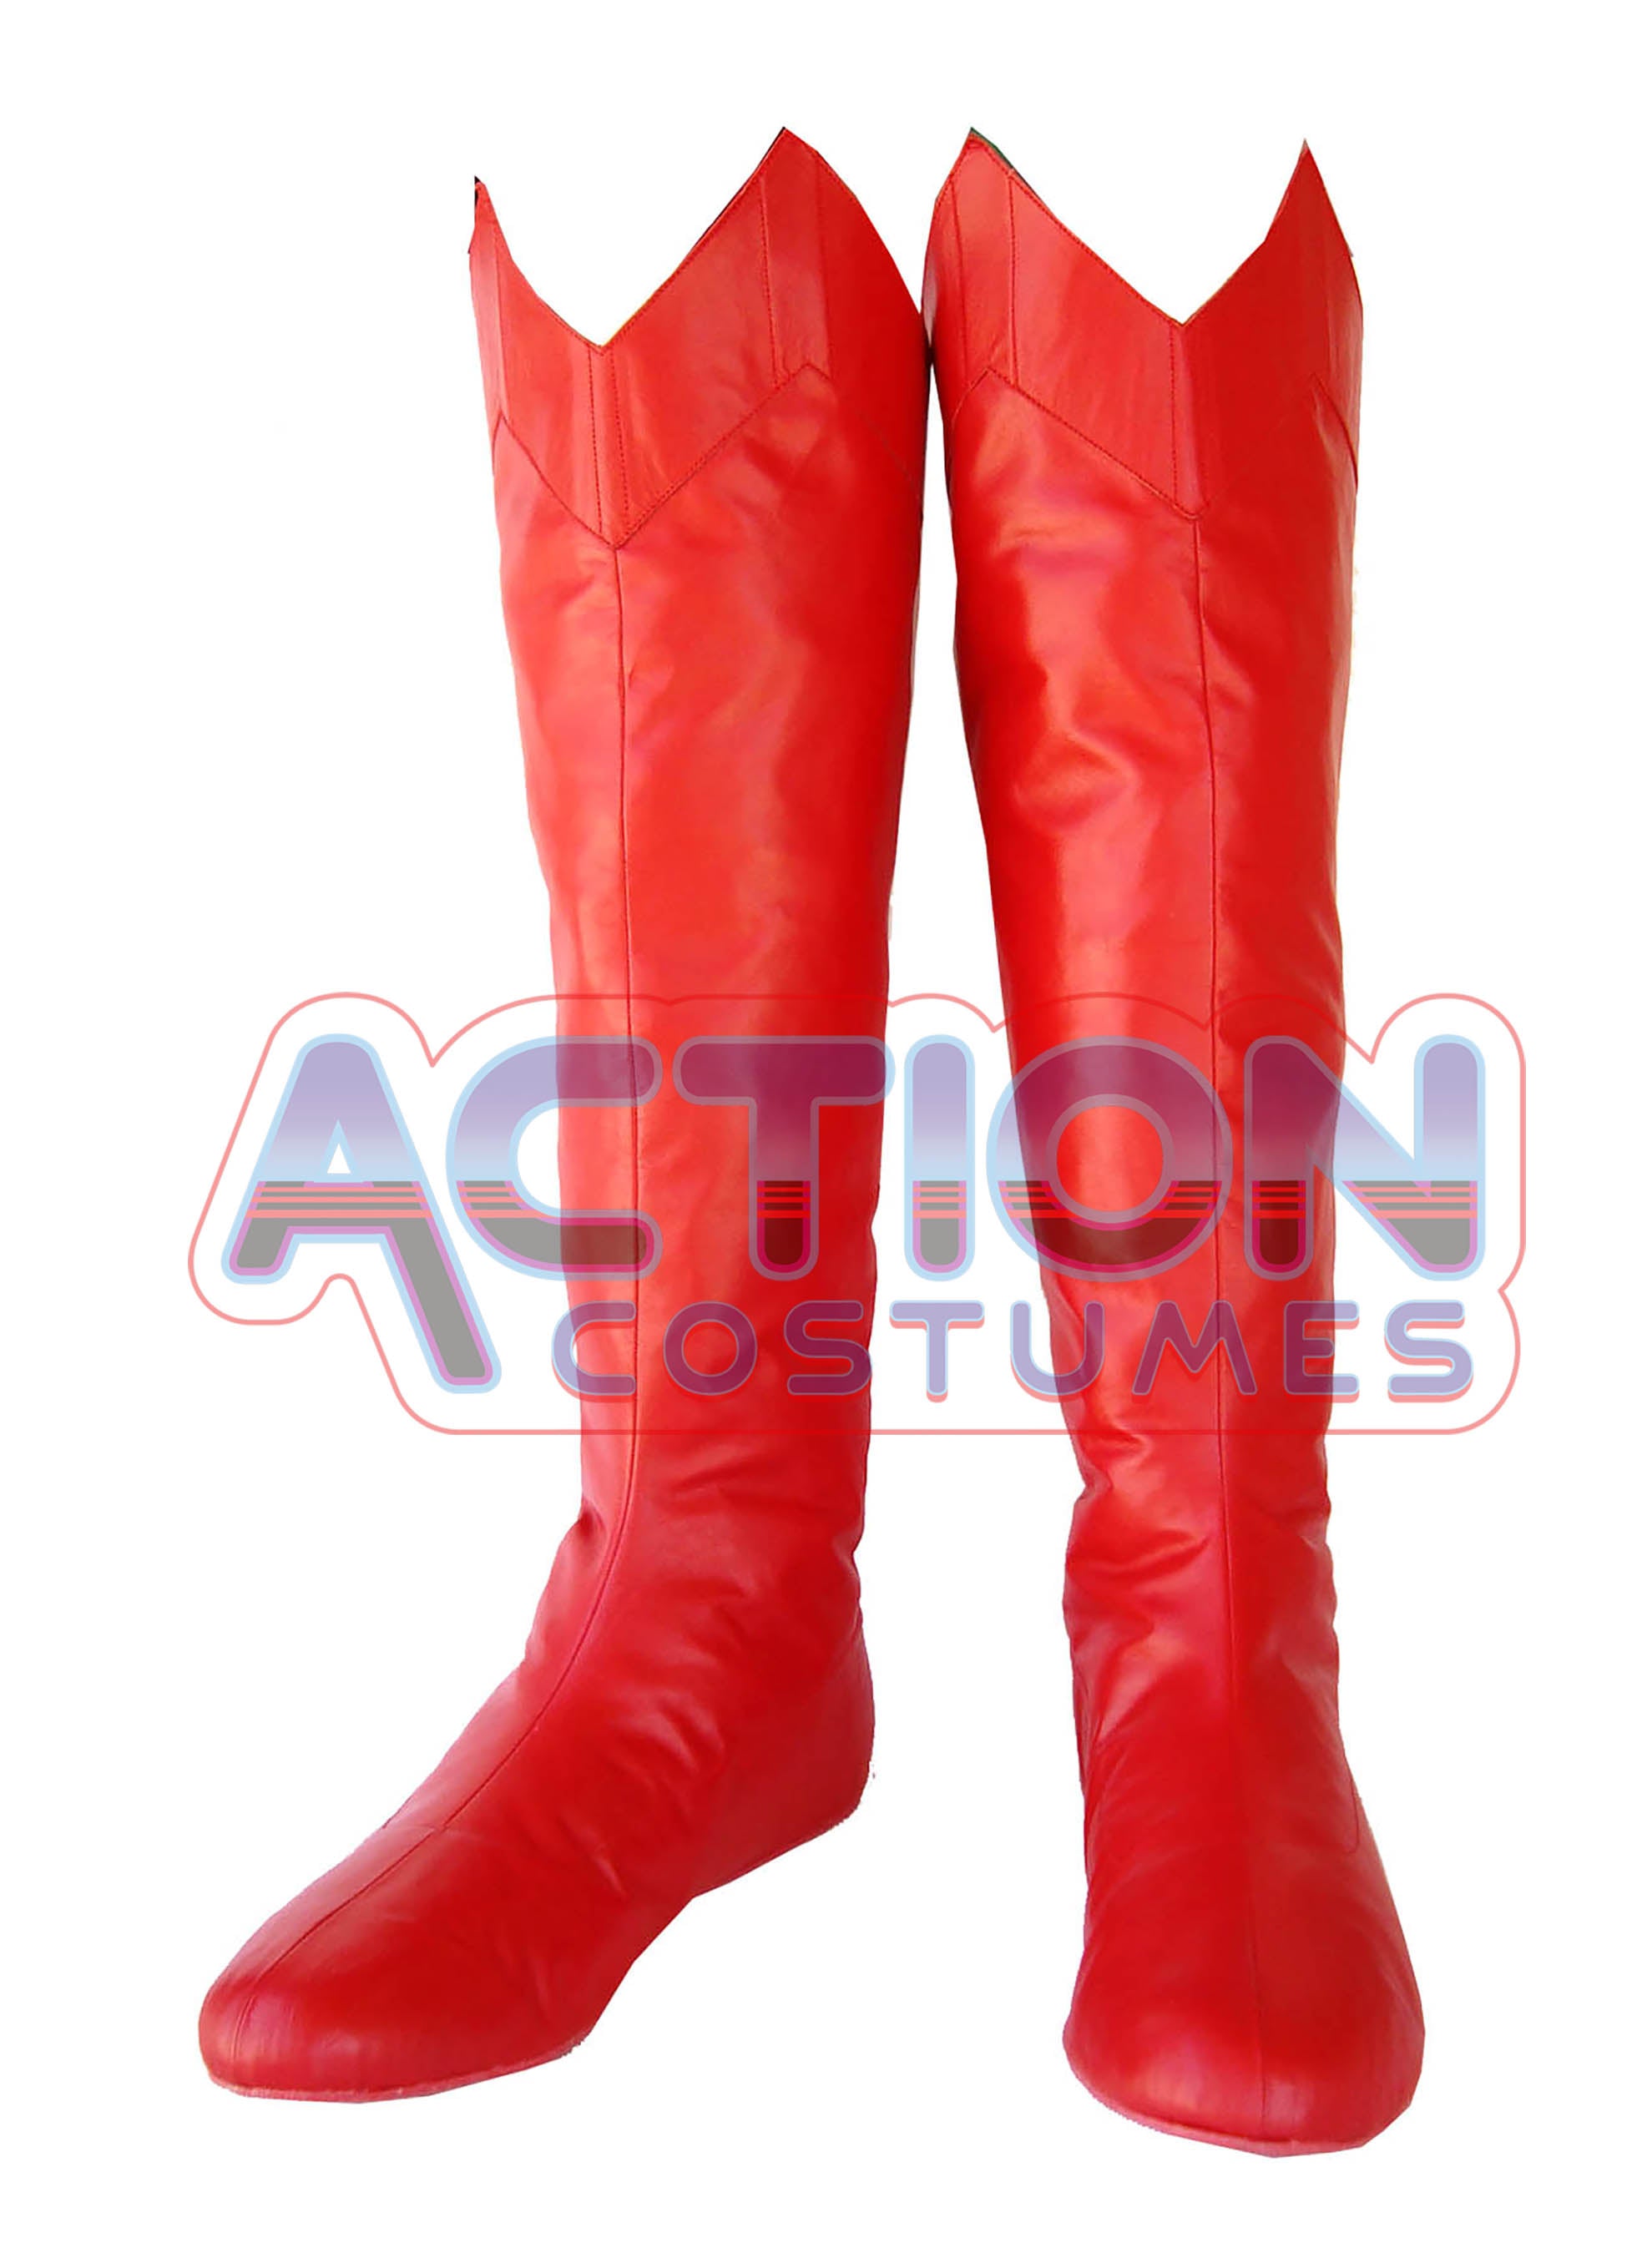 superman-deluxe-boots-70s-style